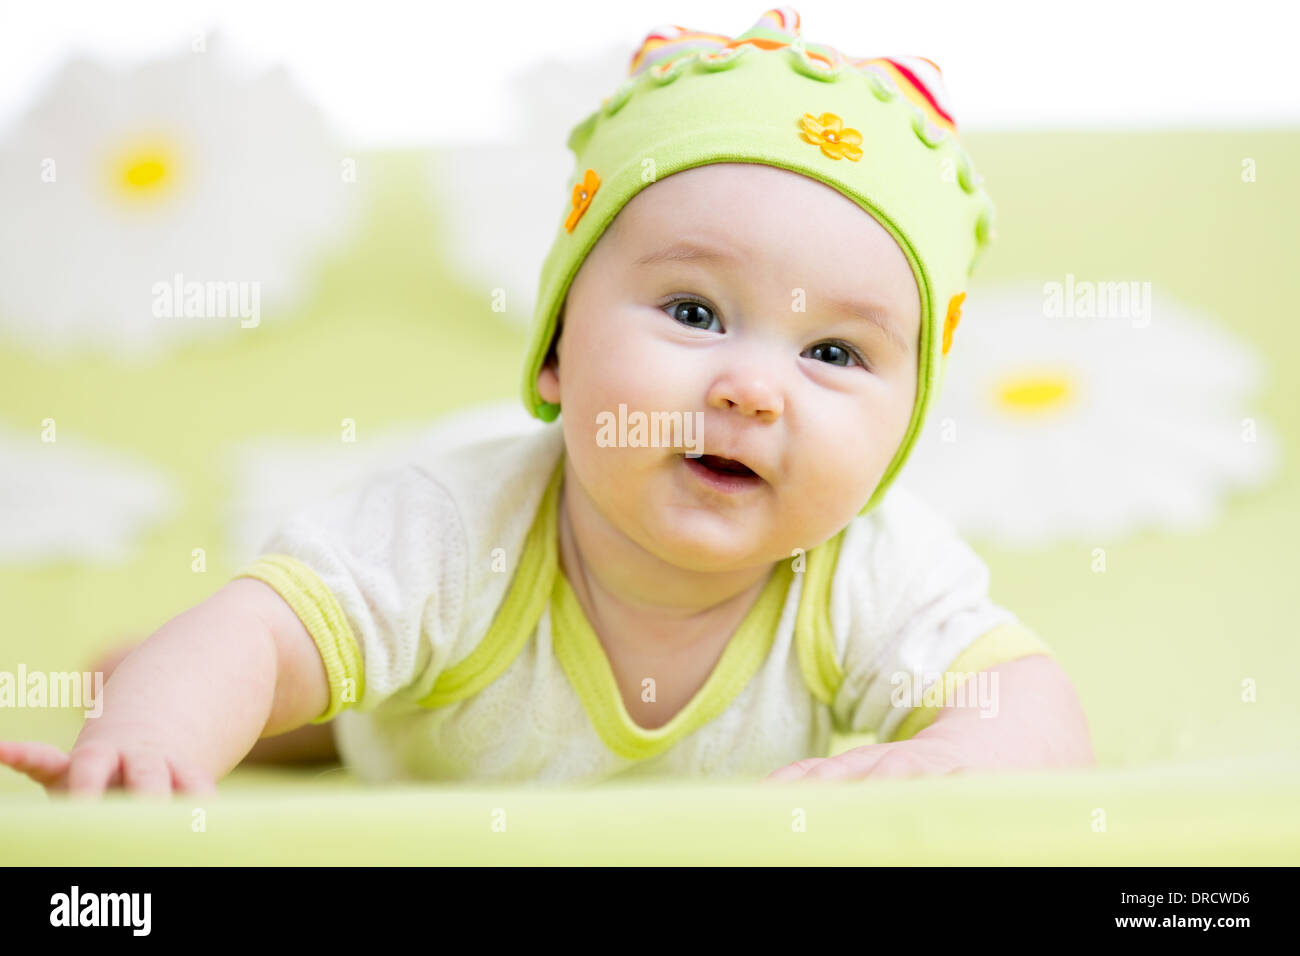 smiling baby lying on green Stock Photo